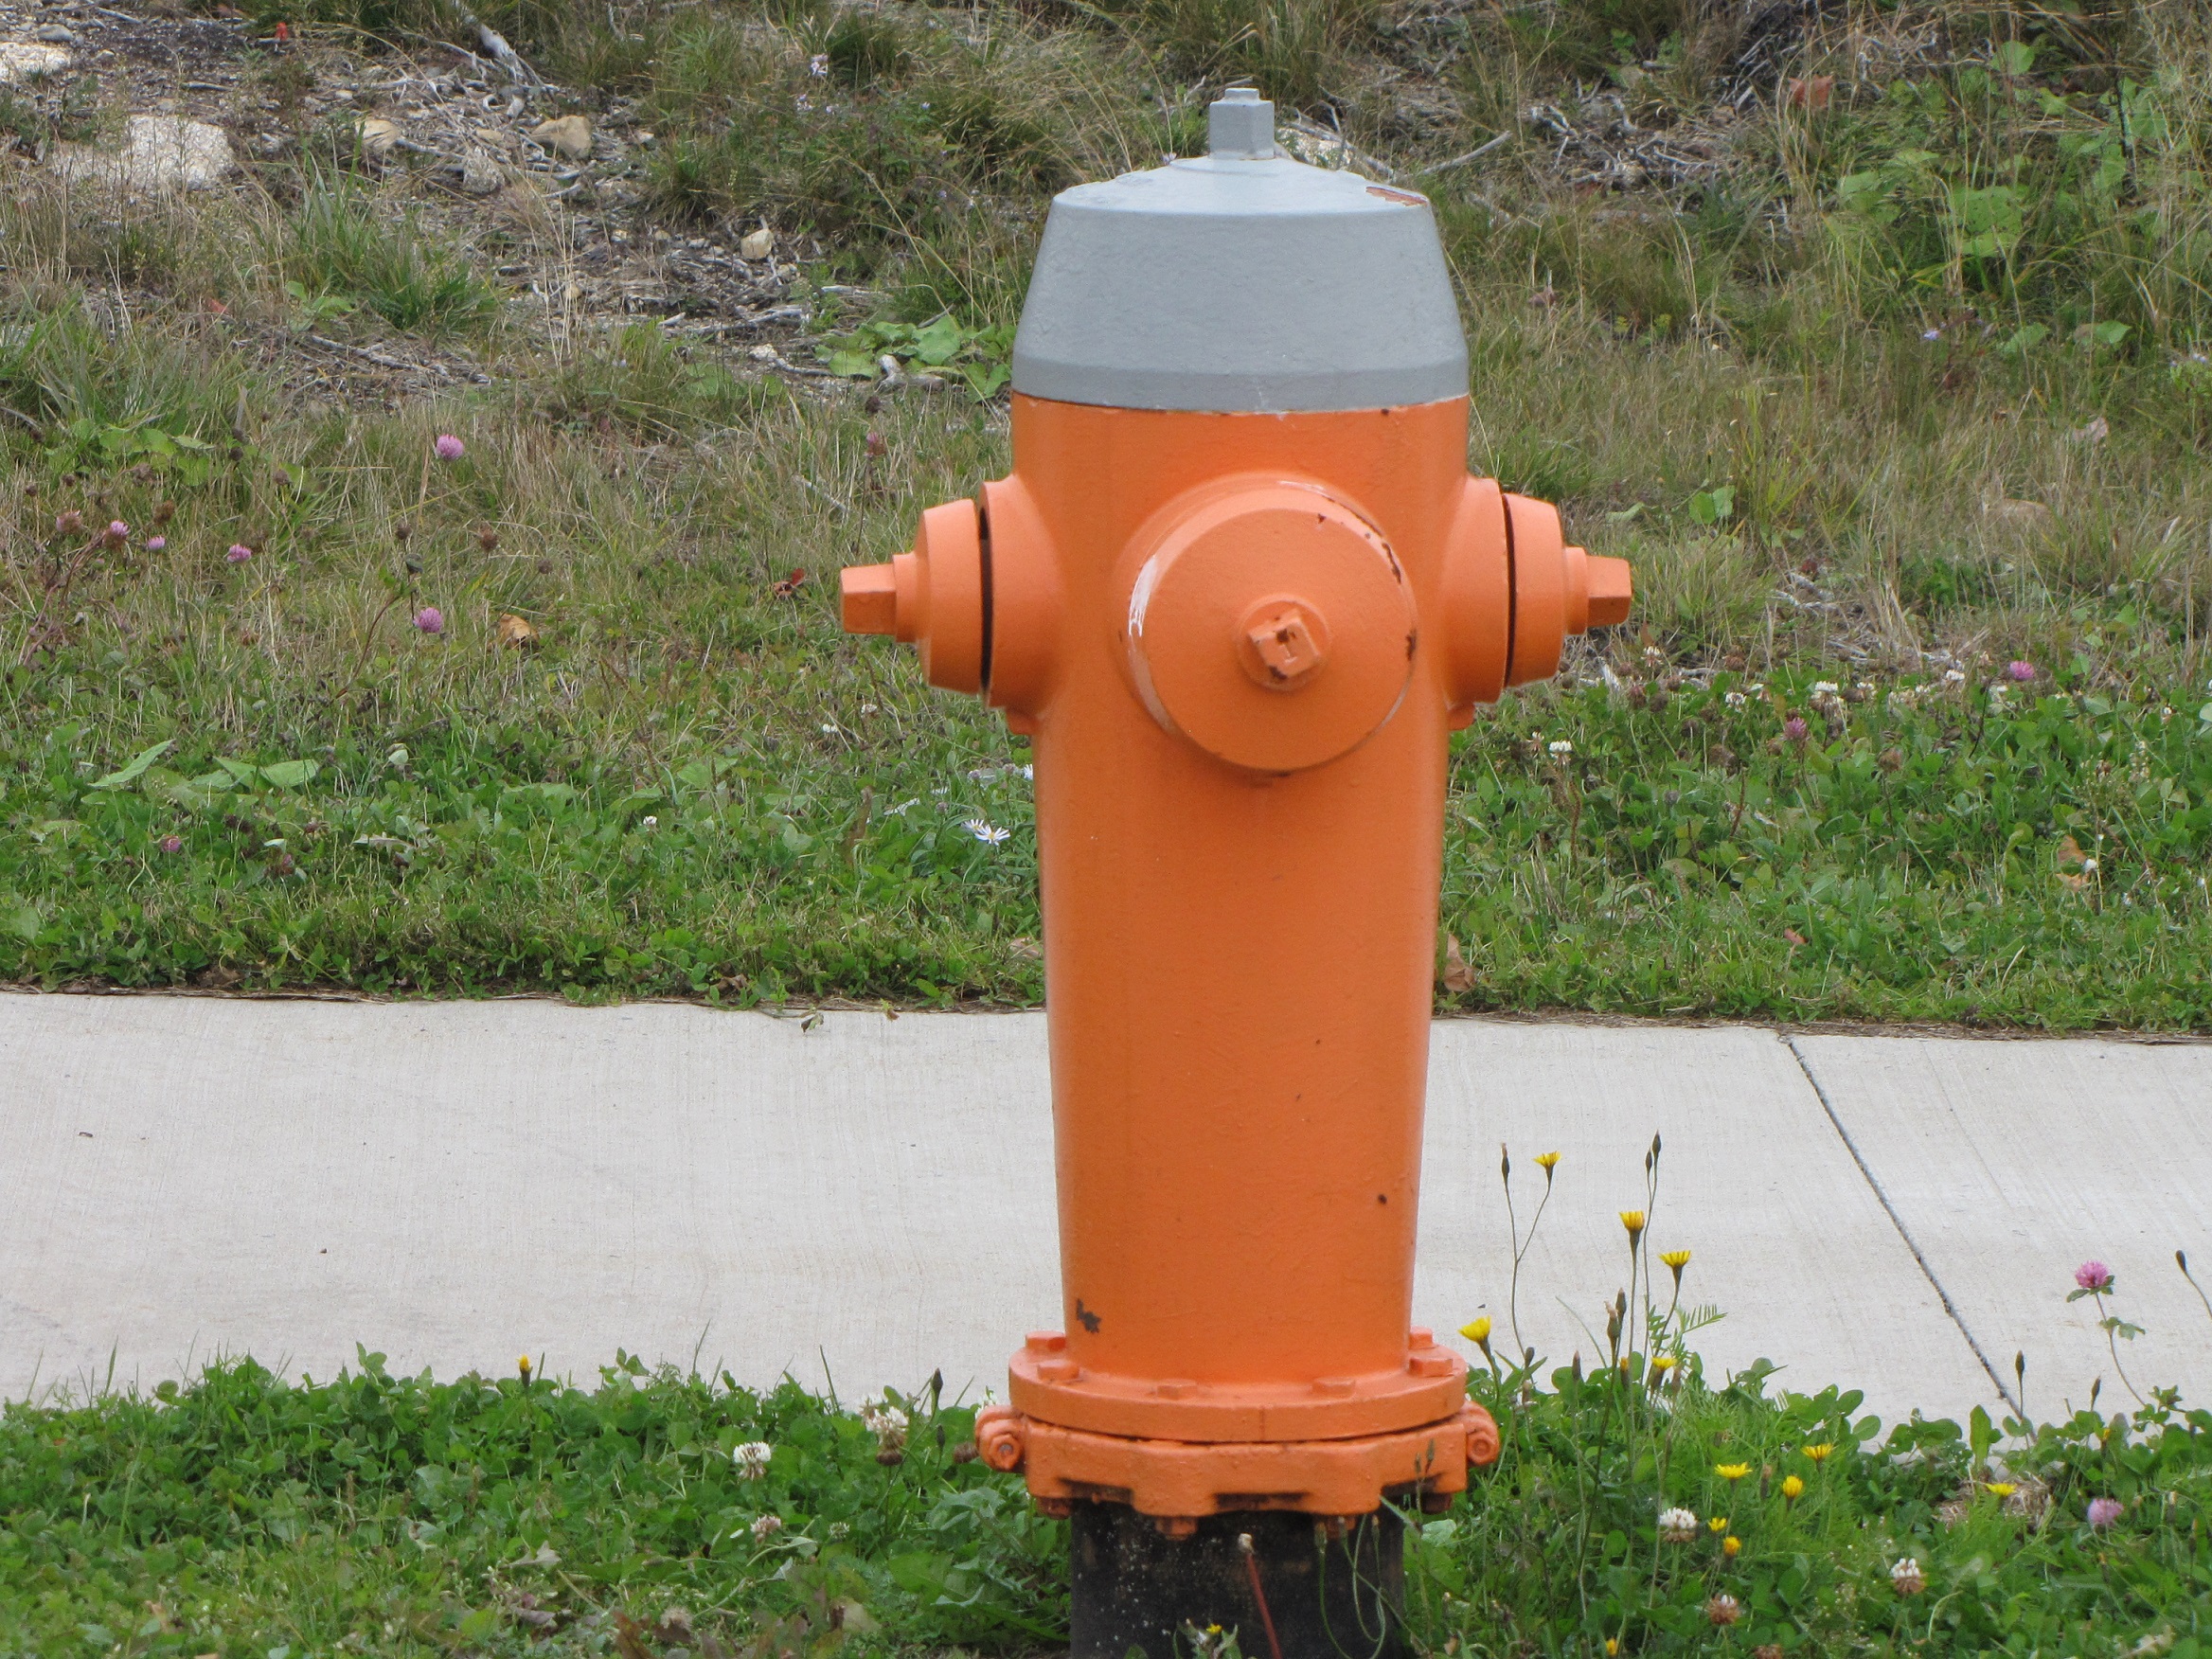 Typical fire hydrant found throughout Halifax Municipality